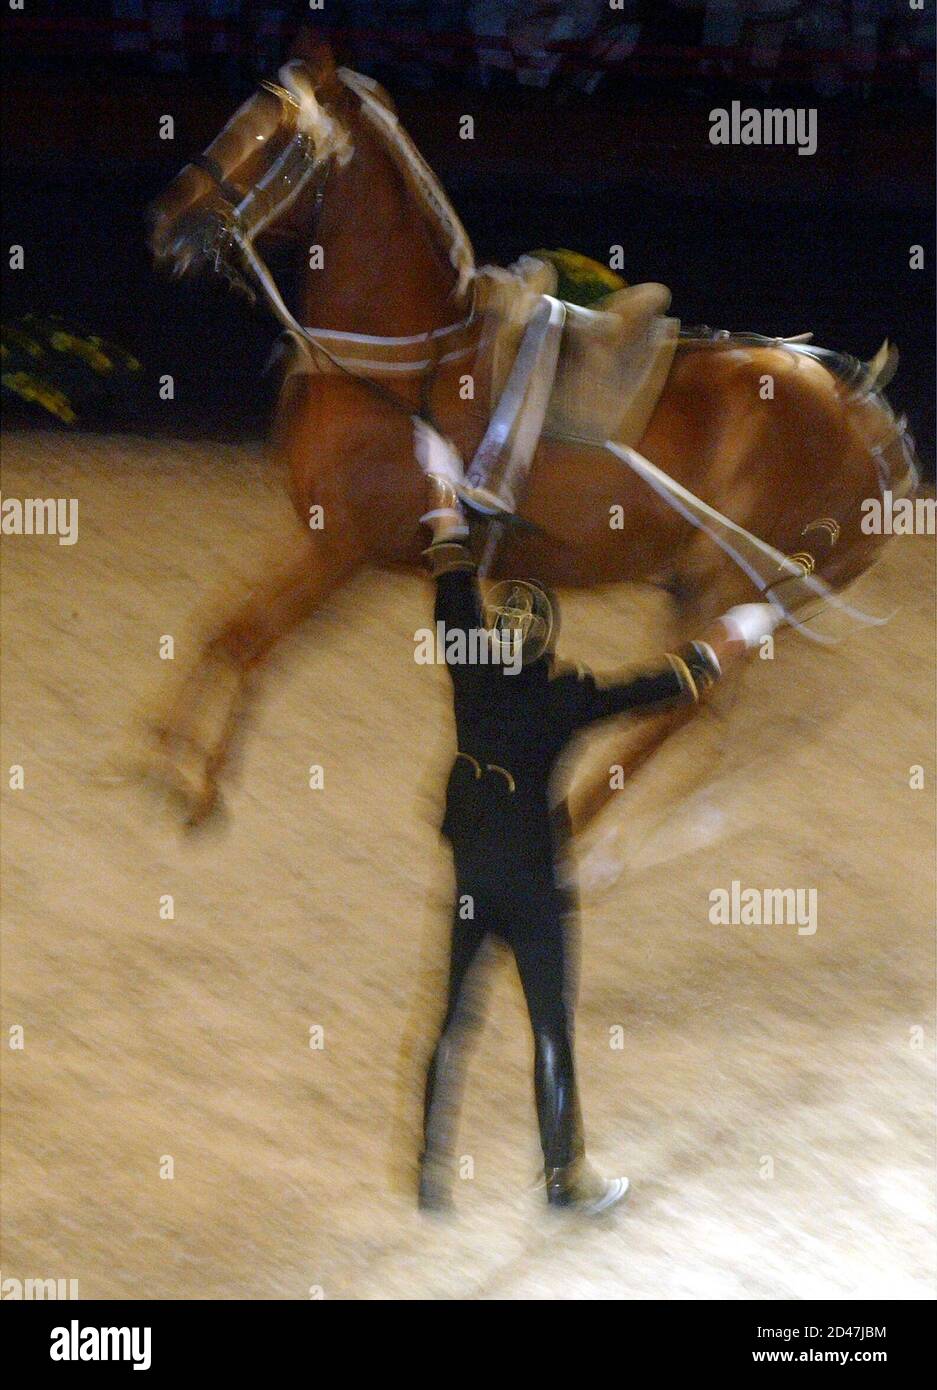 A French thoroughbred jumps as his trainer looks on during the Equestrian  Gala at the Atlantic Pavilion in Lisbon September 18, 2004. Portuguese  Equestrian Art, the Royal Andalusia School of Equestrian Art